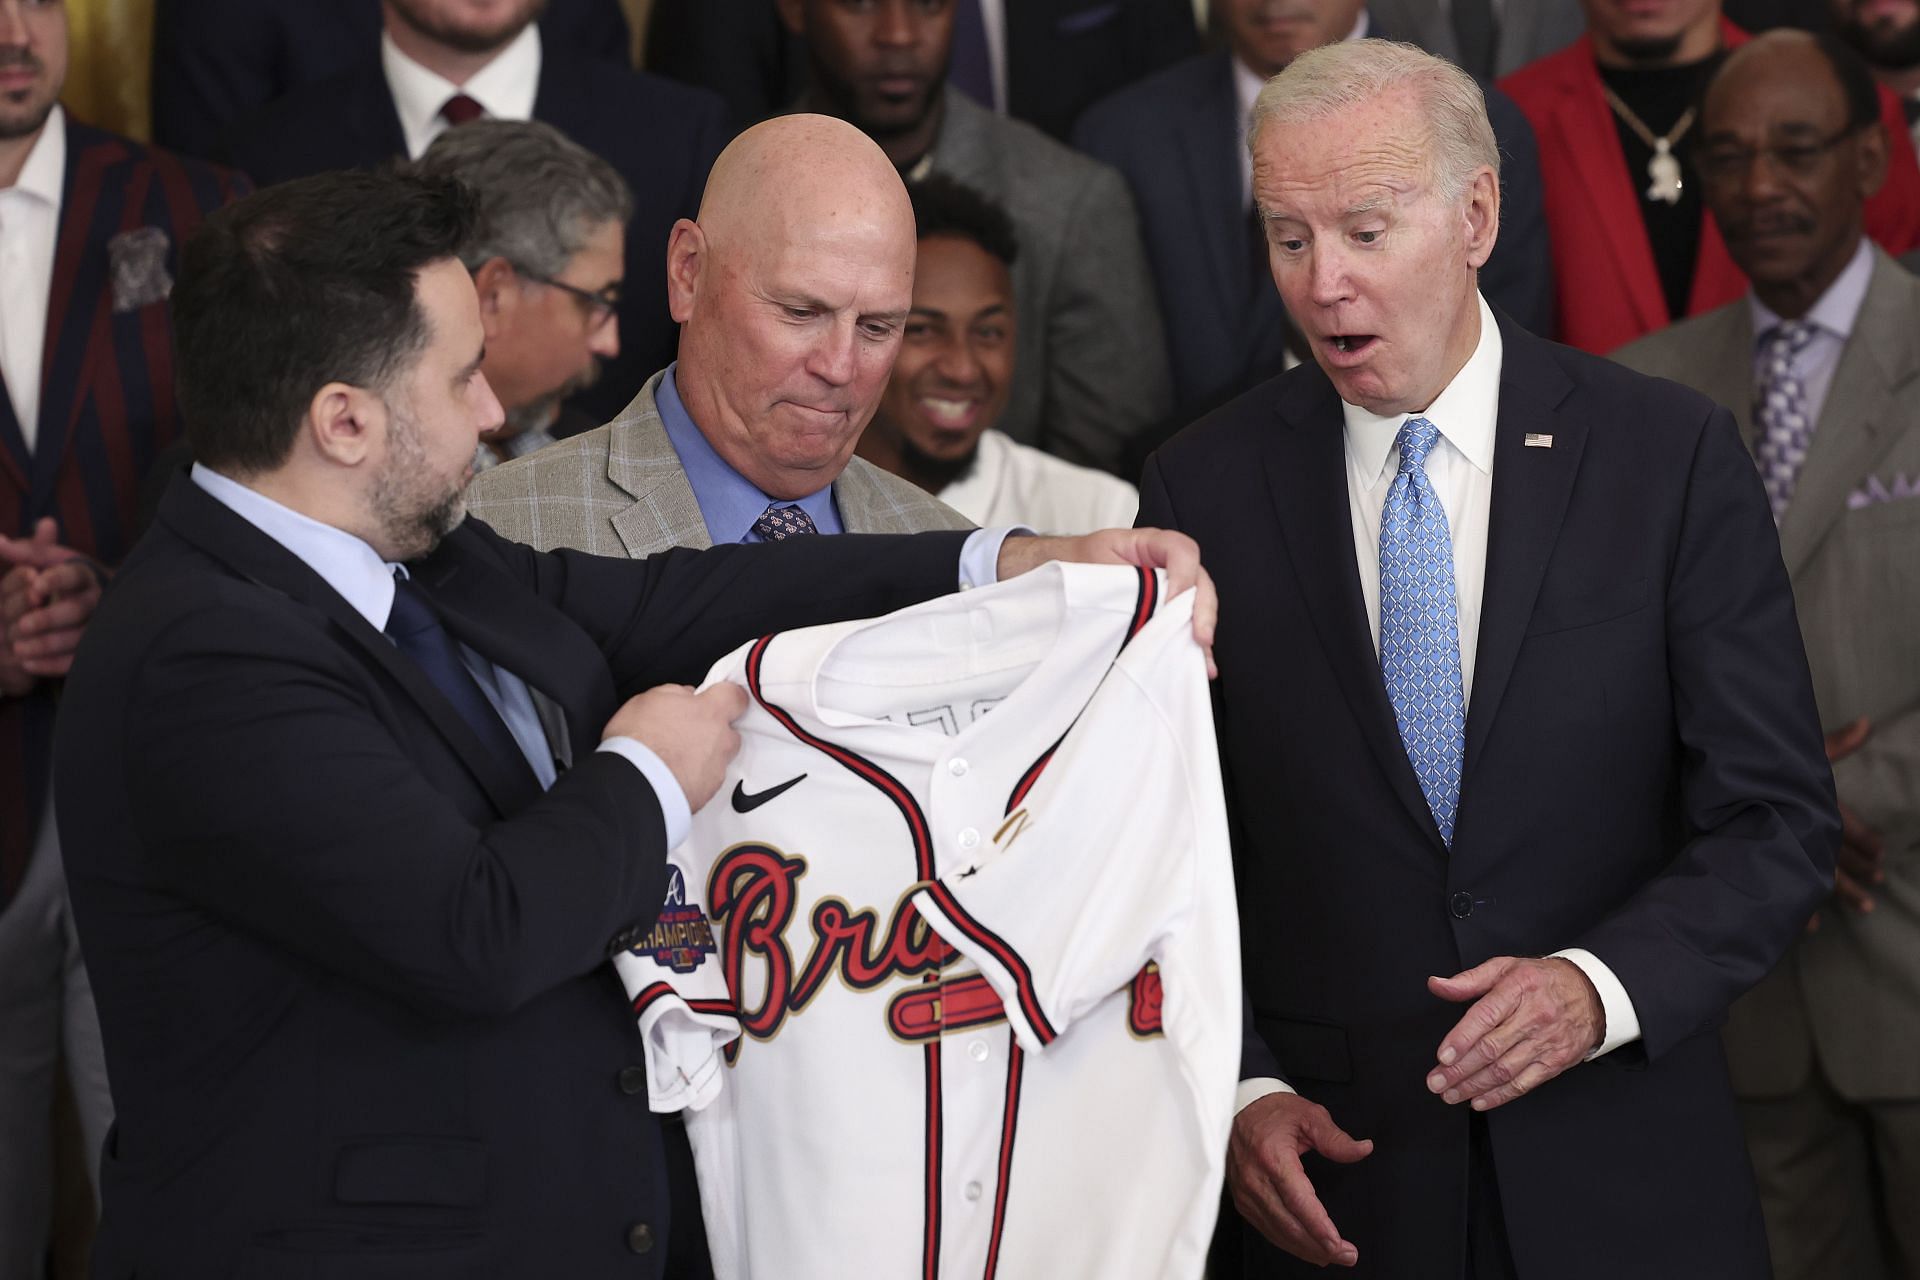 U.S. President Joe Biden receives an Atlanta Braves jersey from Braves Manager Brian Snitker and Braves General Manager Alex Anthopoulos.